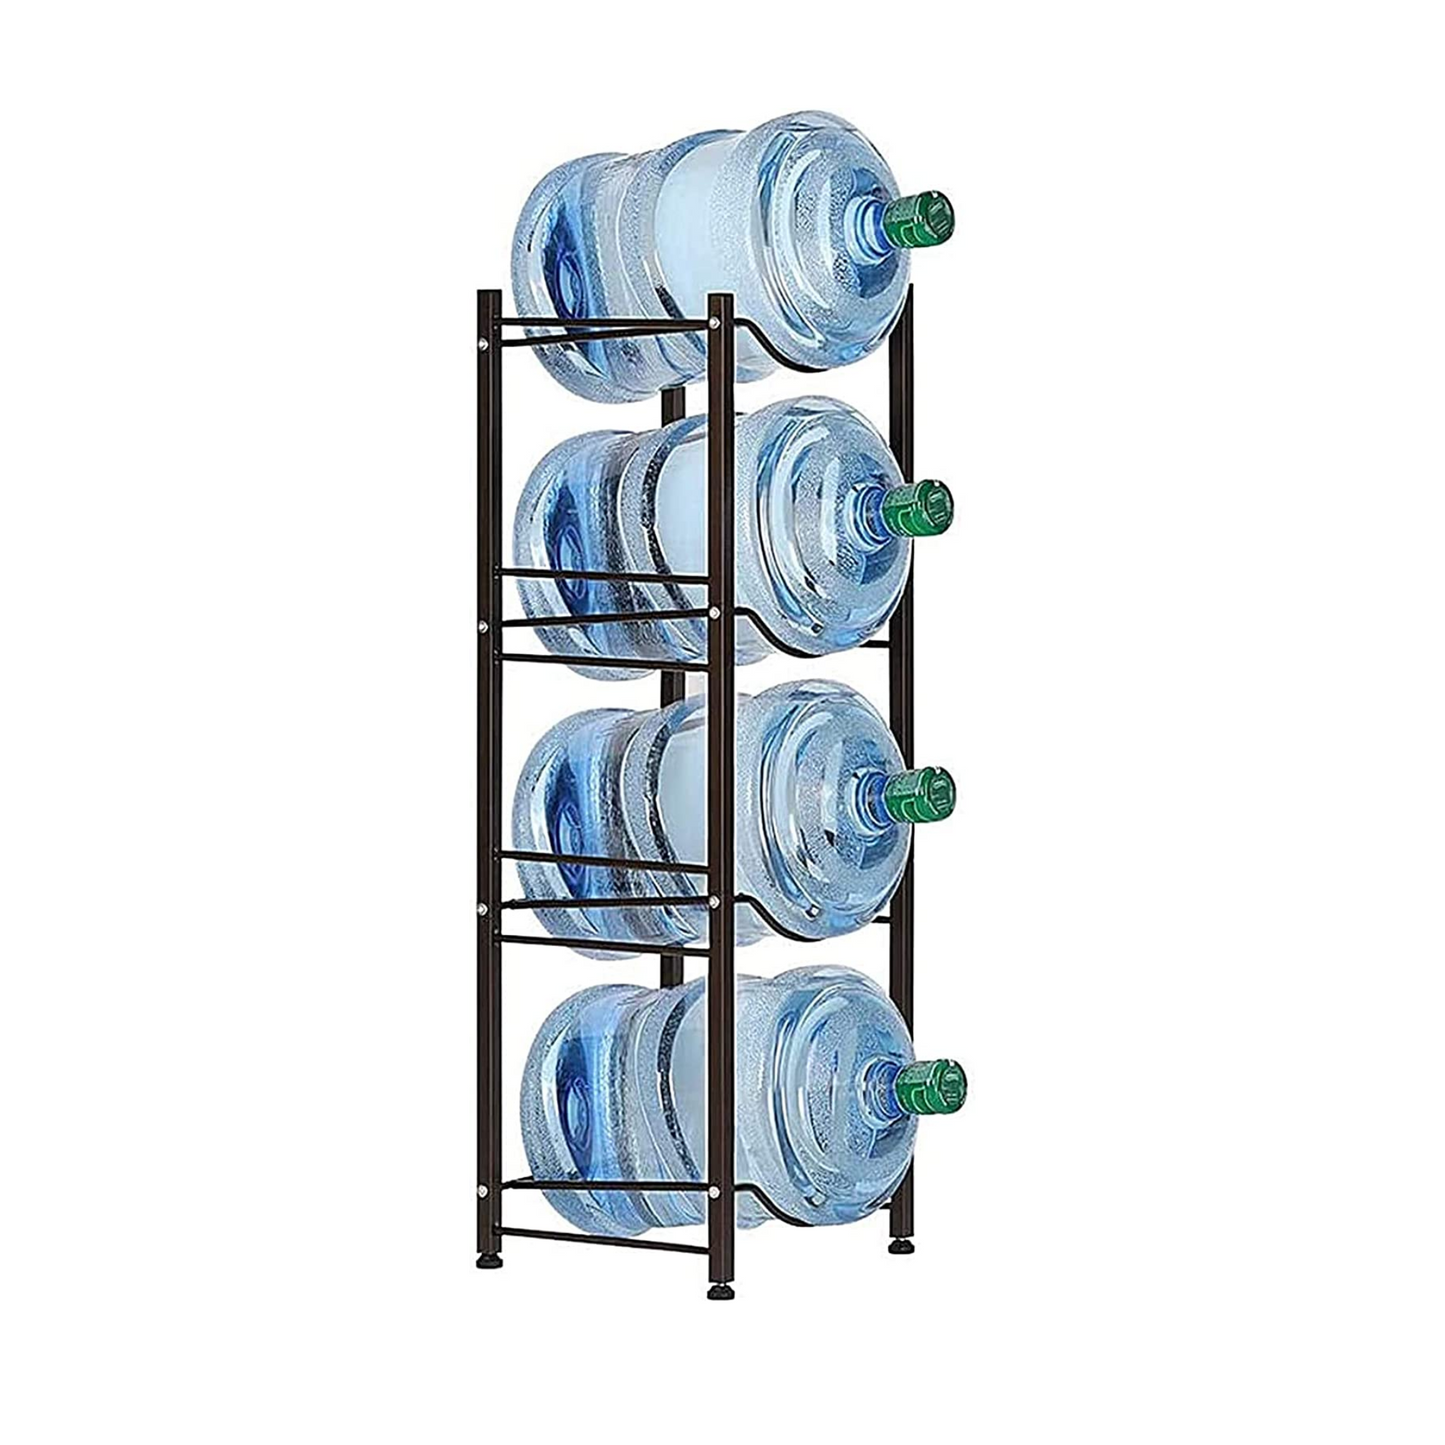 Organize your water bottles in style with our 4-Tier 5-Gallon Water Bottle Rack in dark brown. Made of sturdy steel with a rustproof finish, it can hold up to four water bottles and measures 13.39 x 13.07 x 52.95 inches. Perfect for kitchens, breakrooms, offices, and classrooms.